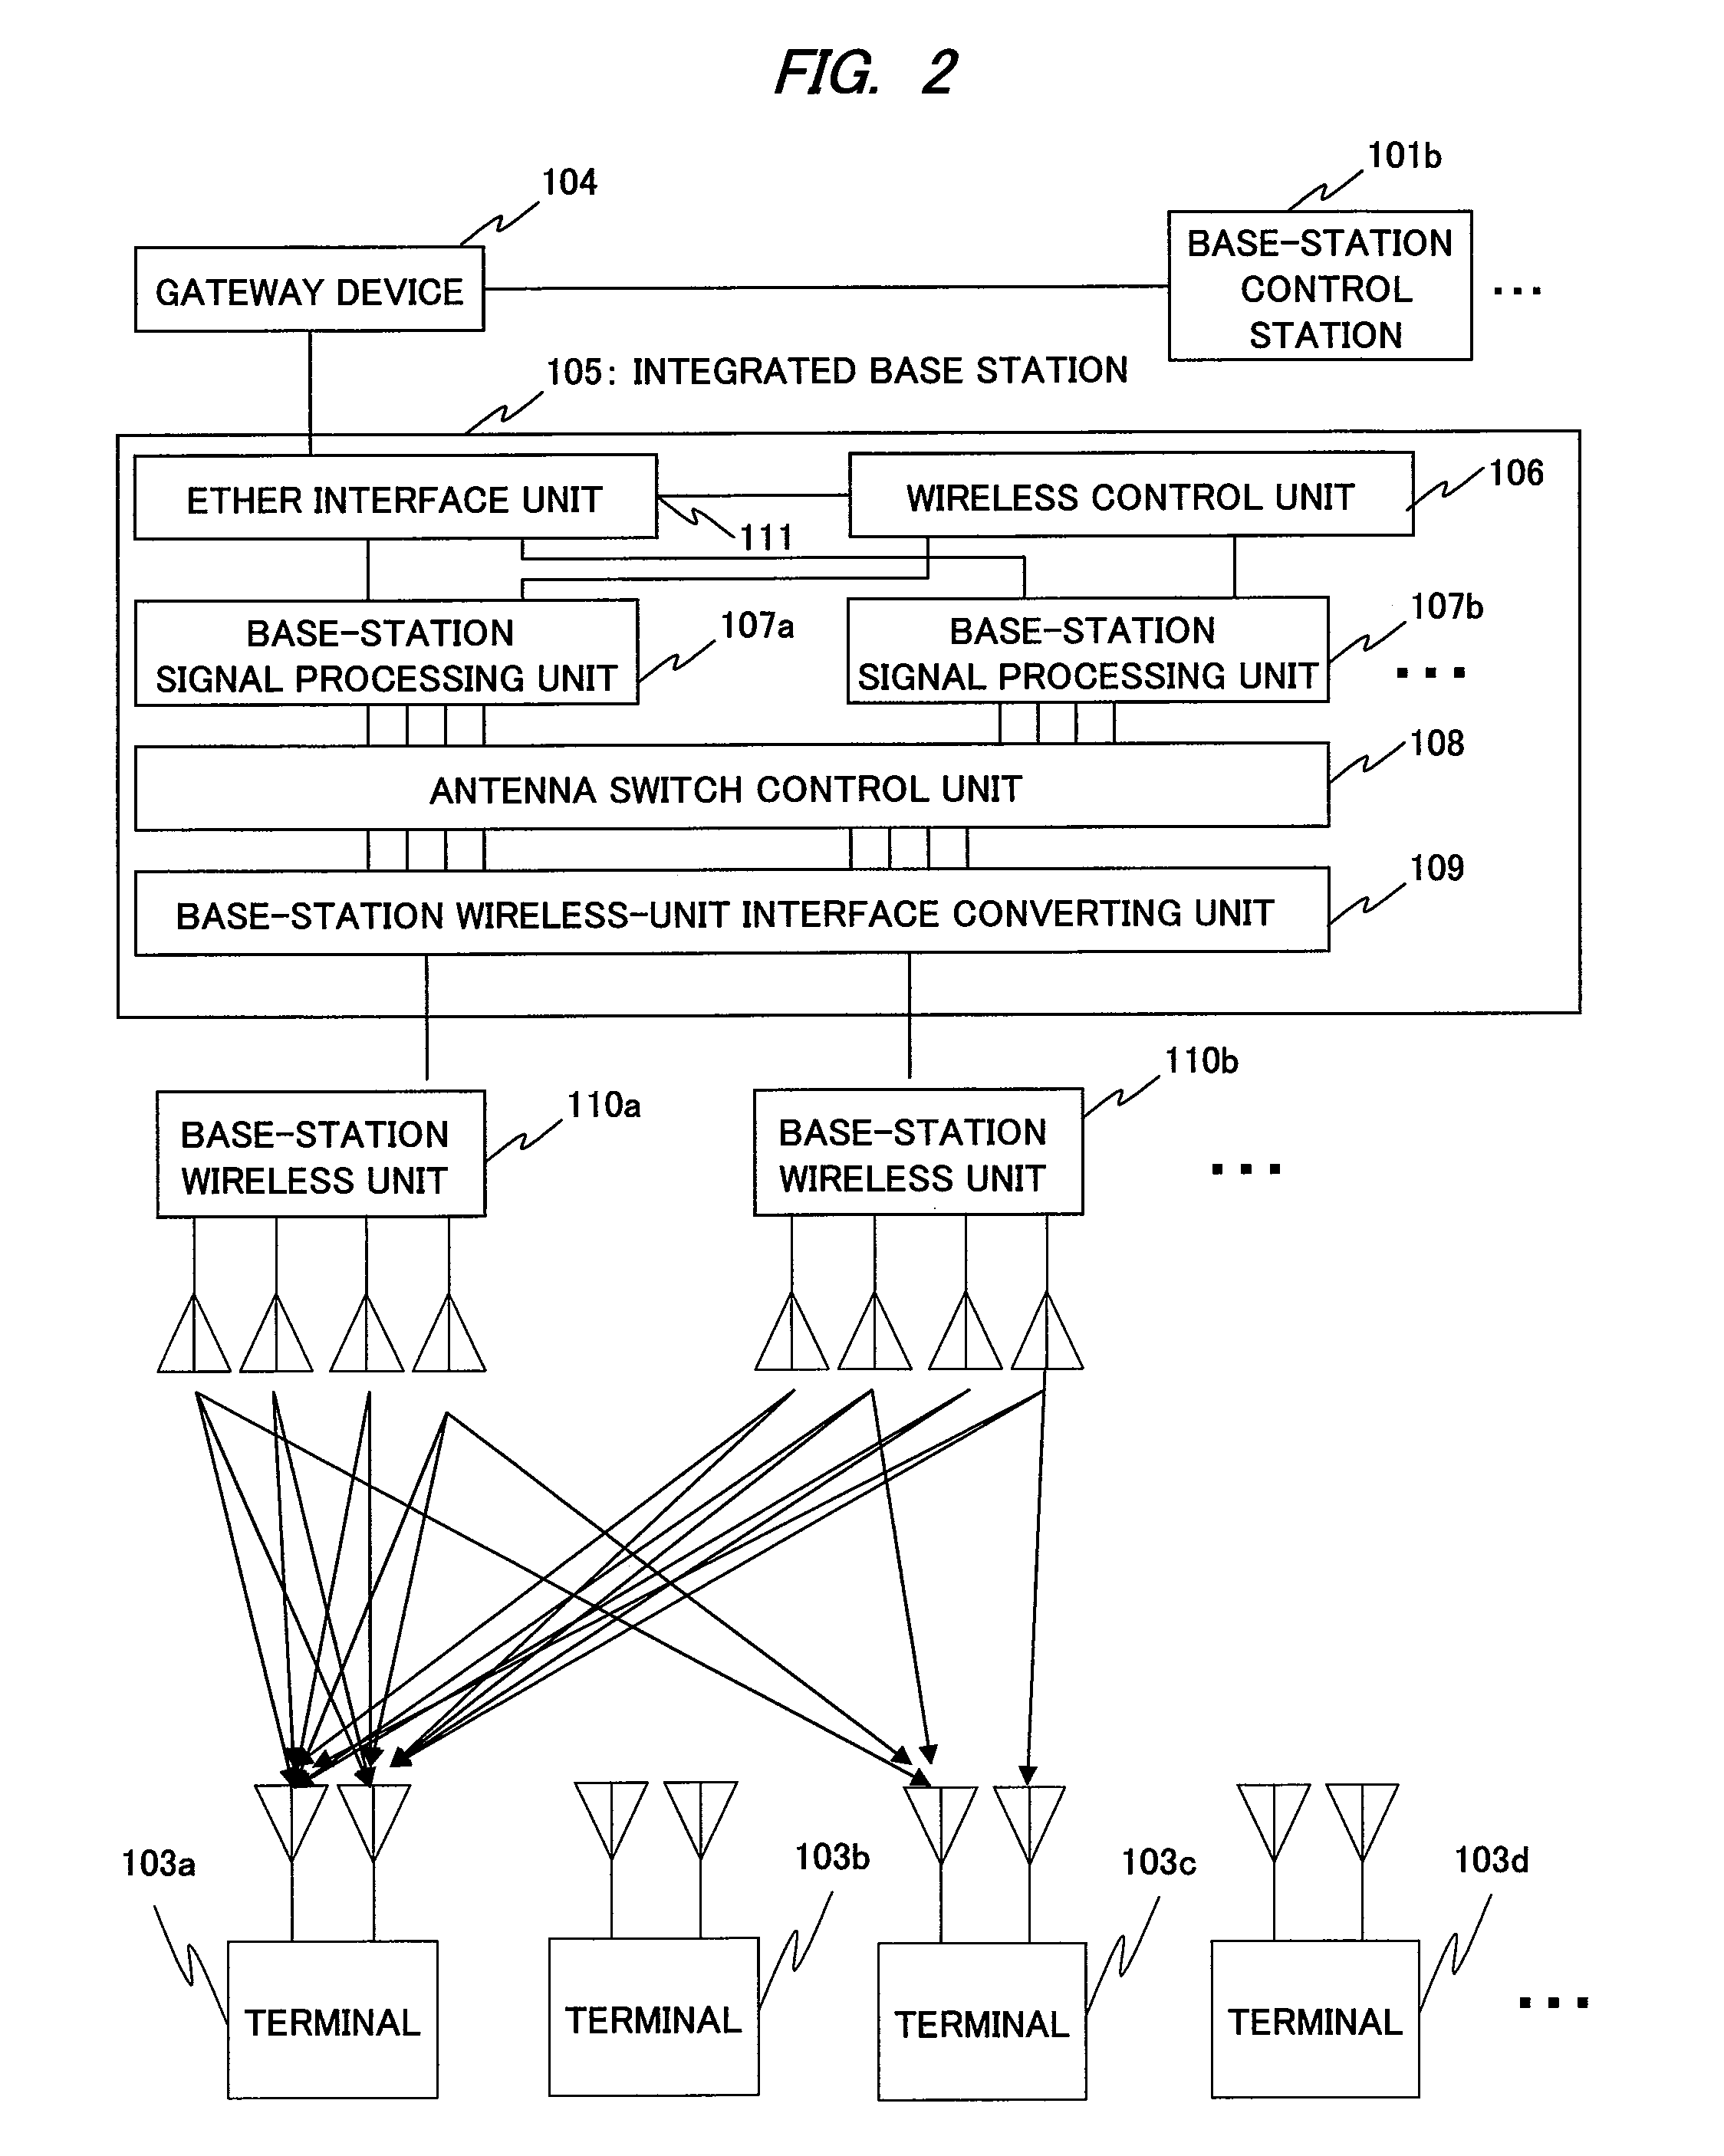 Wireless communication system, integrated base station, and terminal